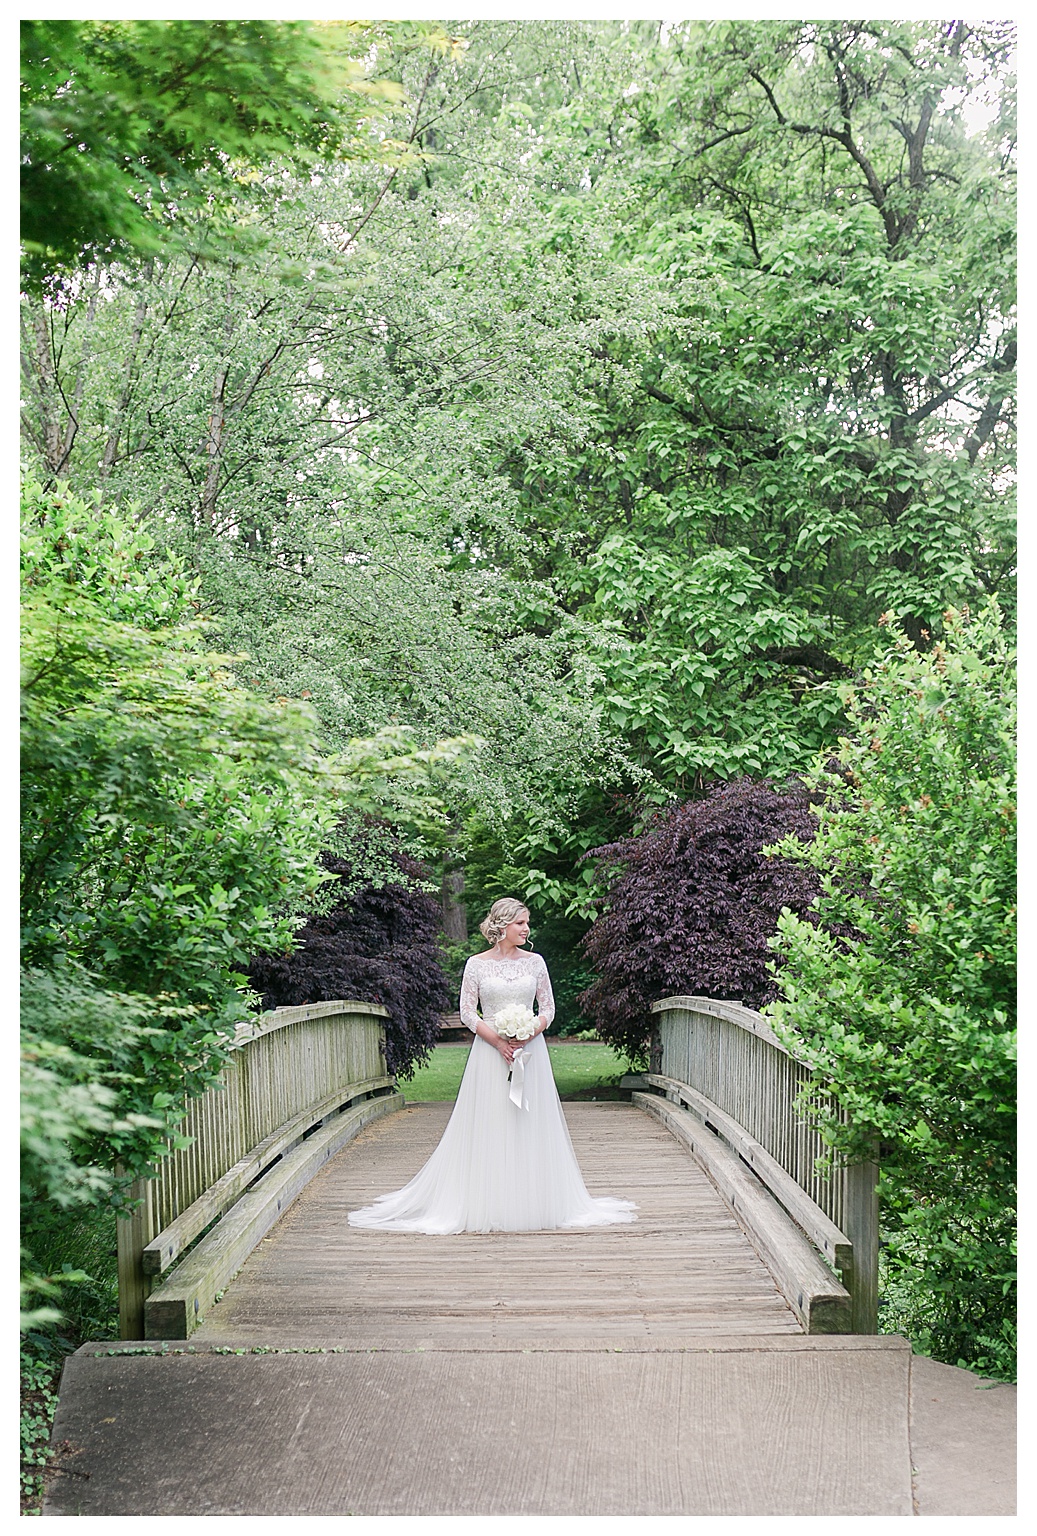 bridal portrait session, bride poses on wood bridge surrounded by green and purple foliage